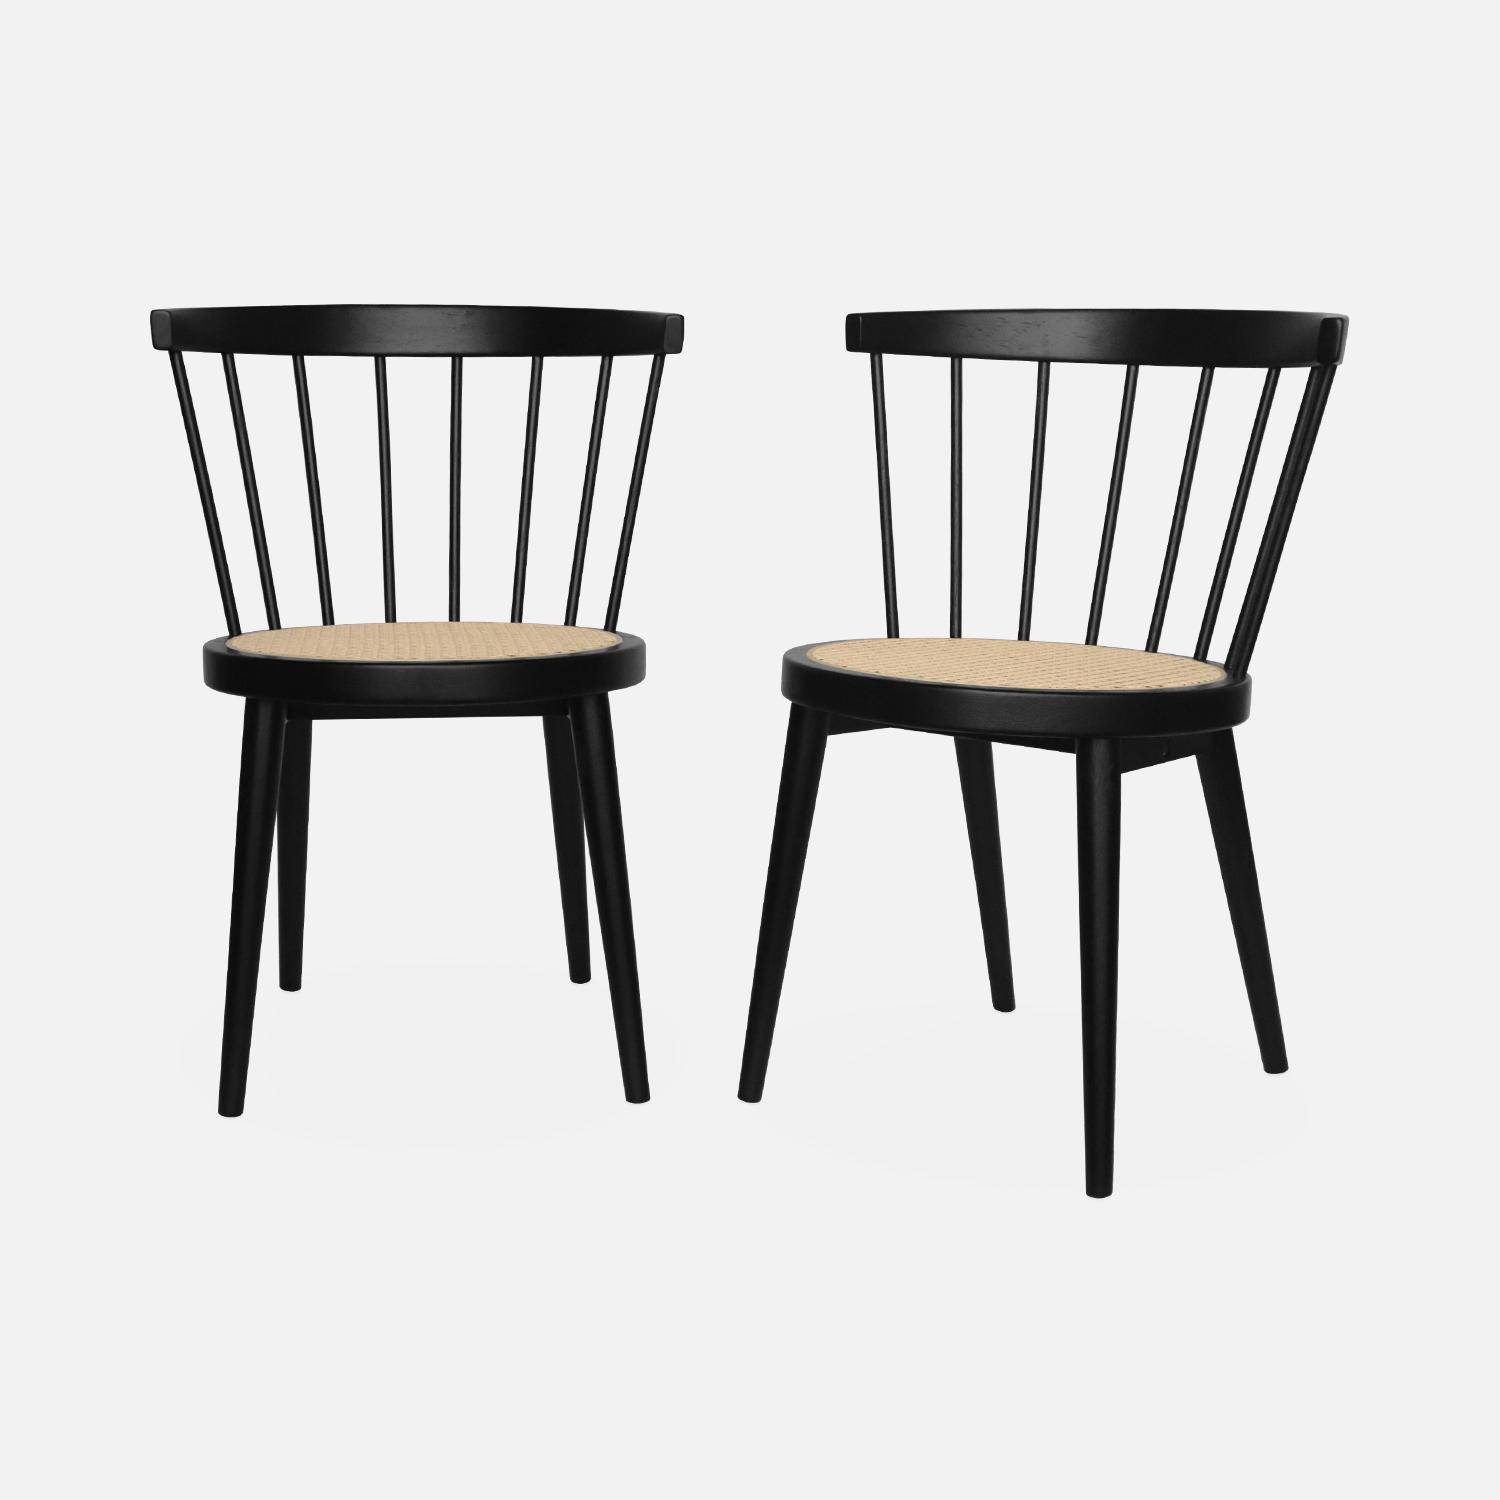 Pair of wood and cane dining chairs, W53 x D53.5 x H76cm, black Photo4